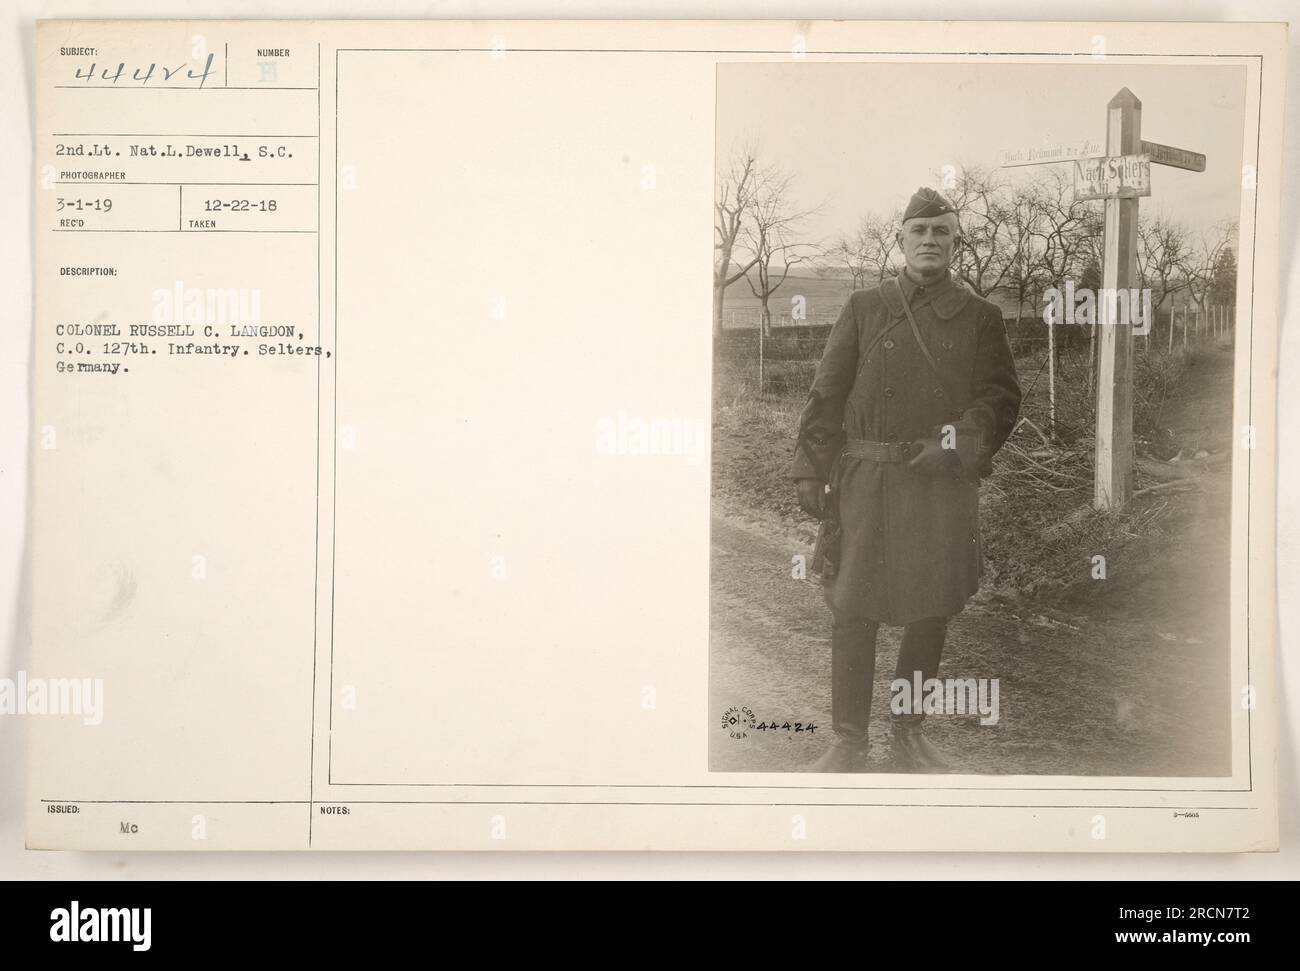 2nd Lieutenant Nat.L. Dewell of the Signal Corps photographed Colonel Russell C. Langdon, c.o. of the 127th Infantry, on March 1, 1919, in Selters, Germany. This photo is part of a collection with the reference number 44414, and it was issued on December 22, 1918. Stock Photo